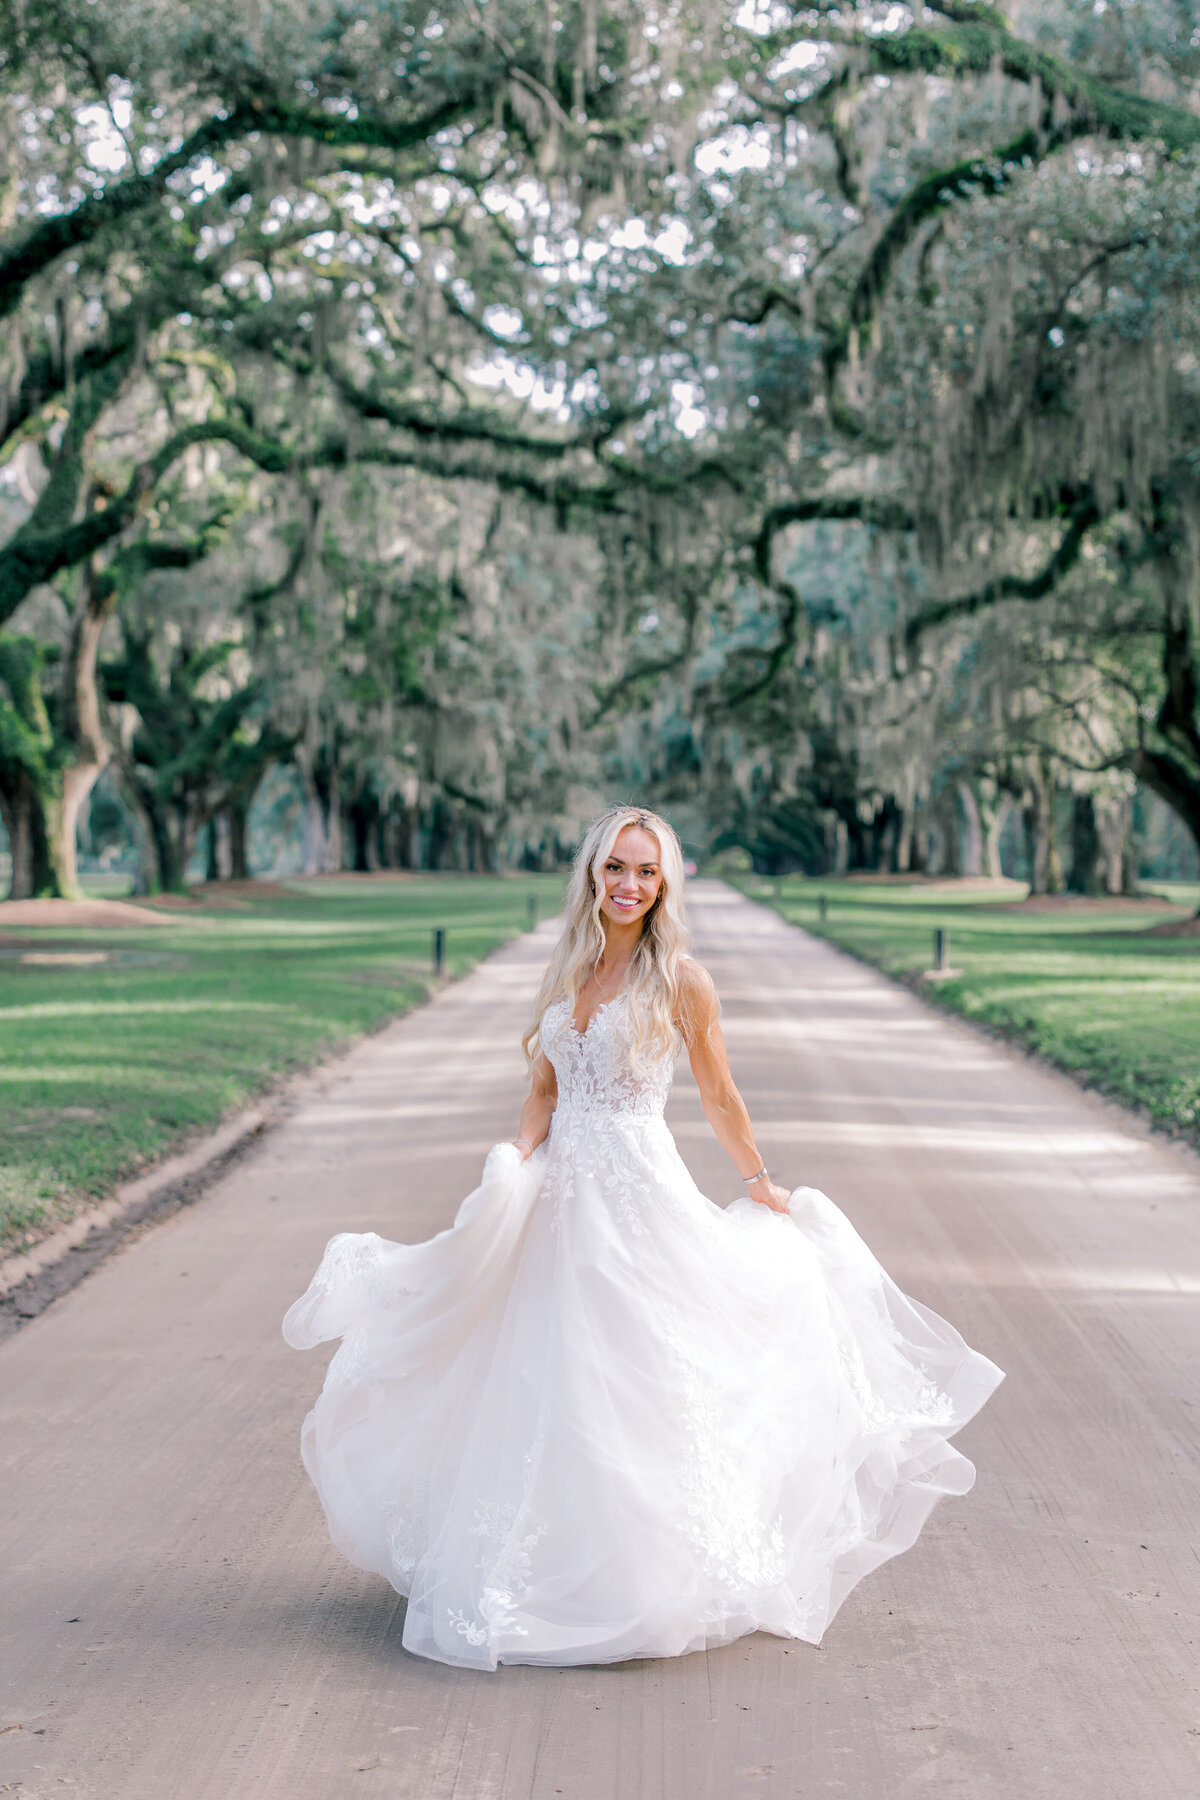 Bride on the road at Boone hall